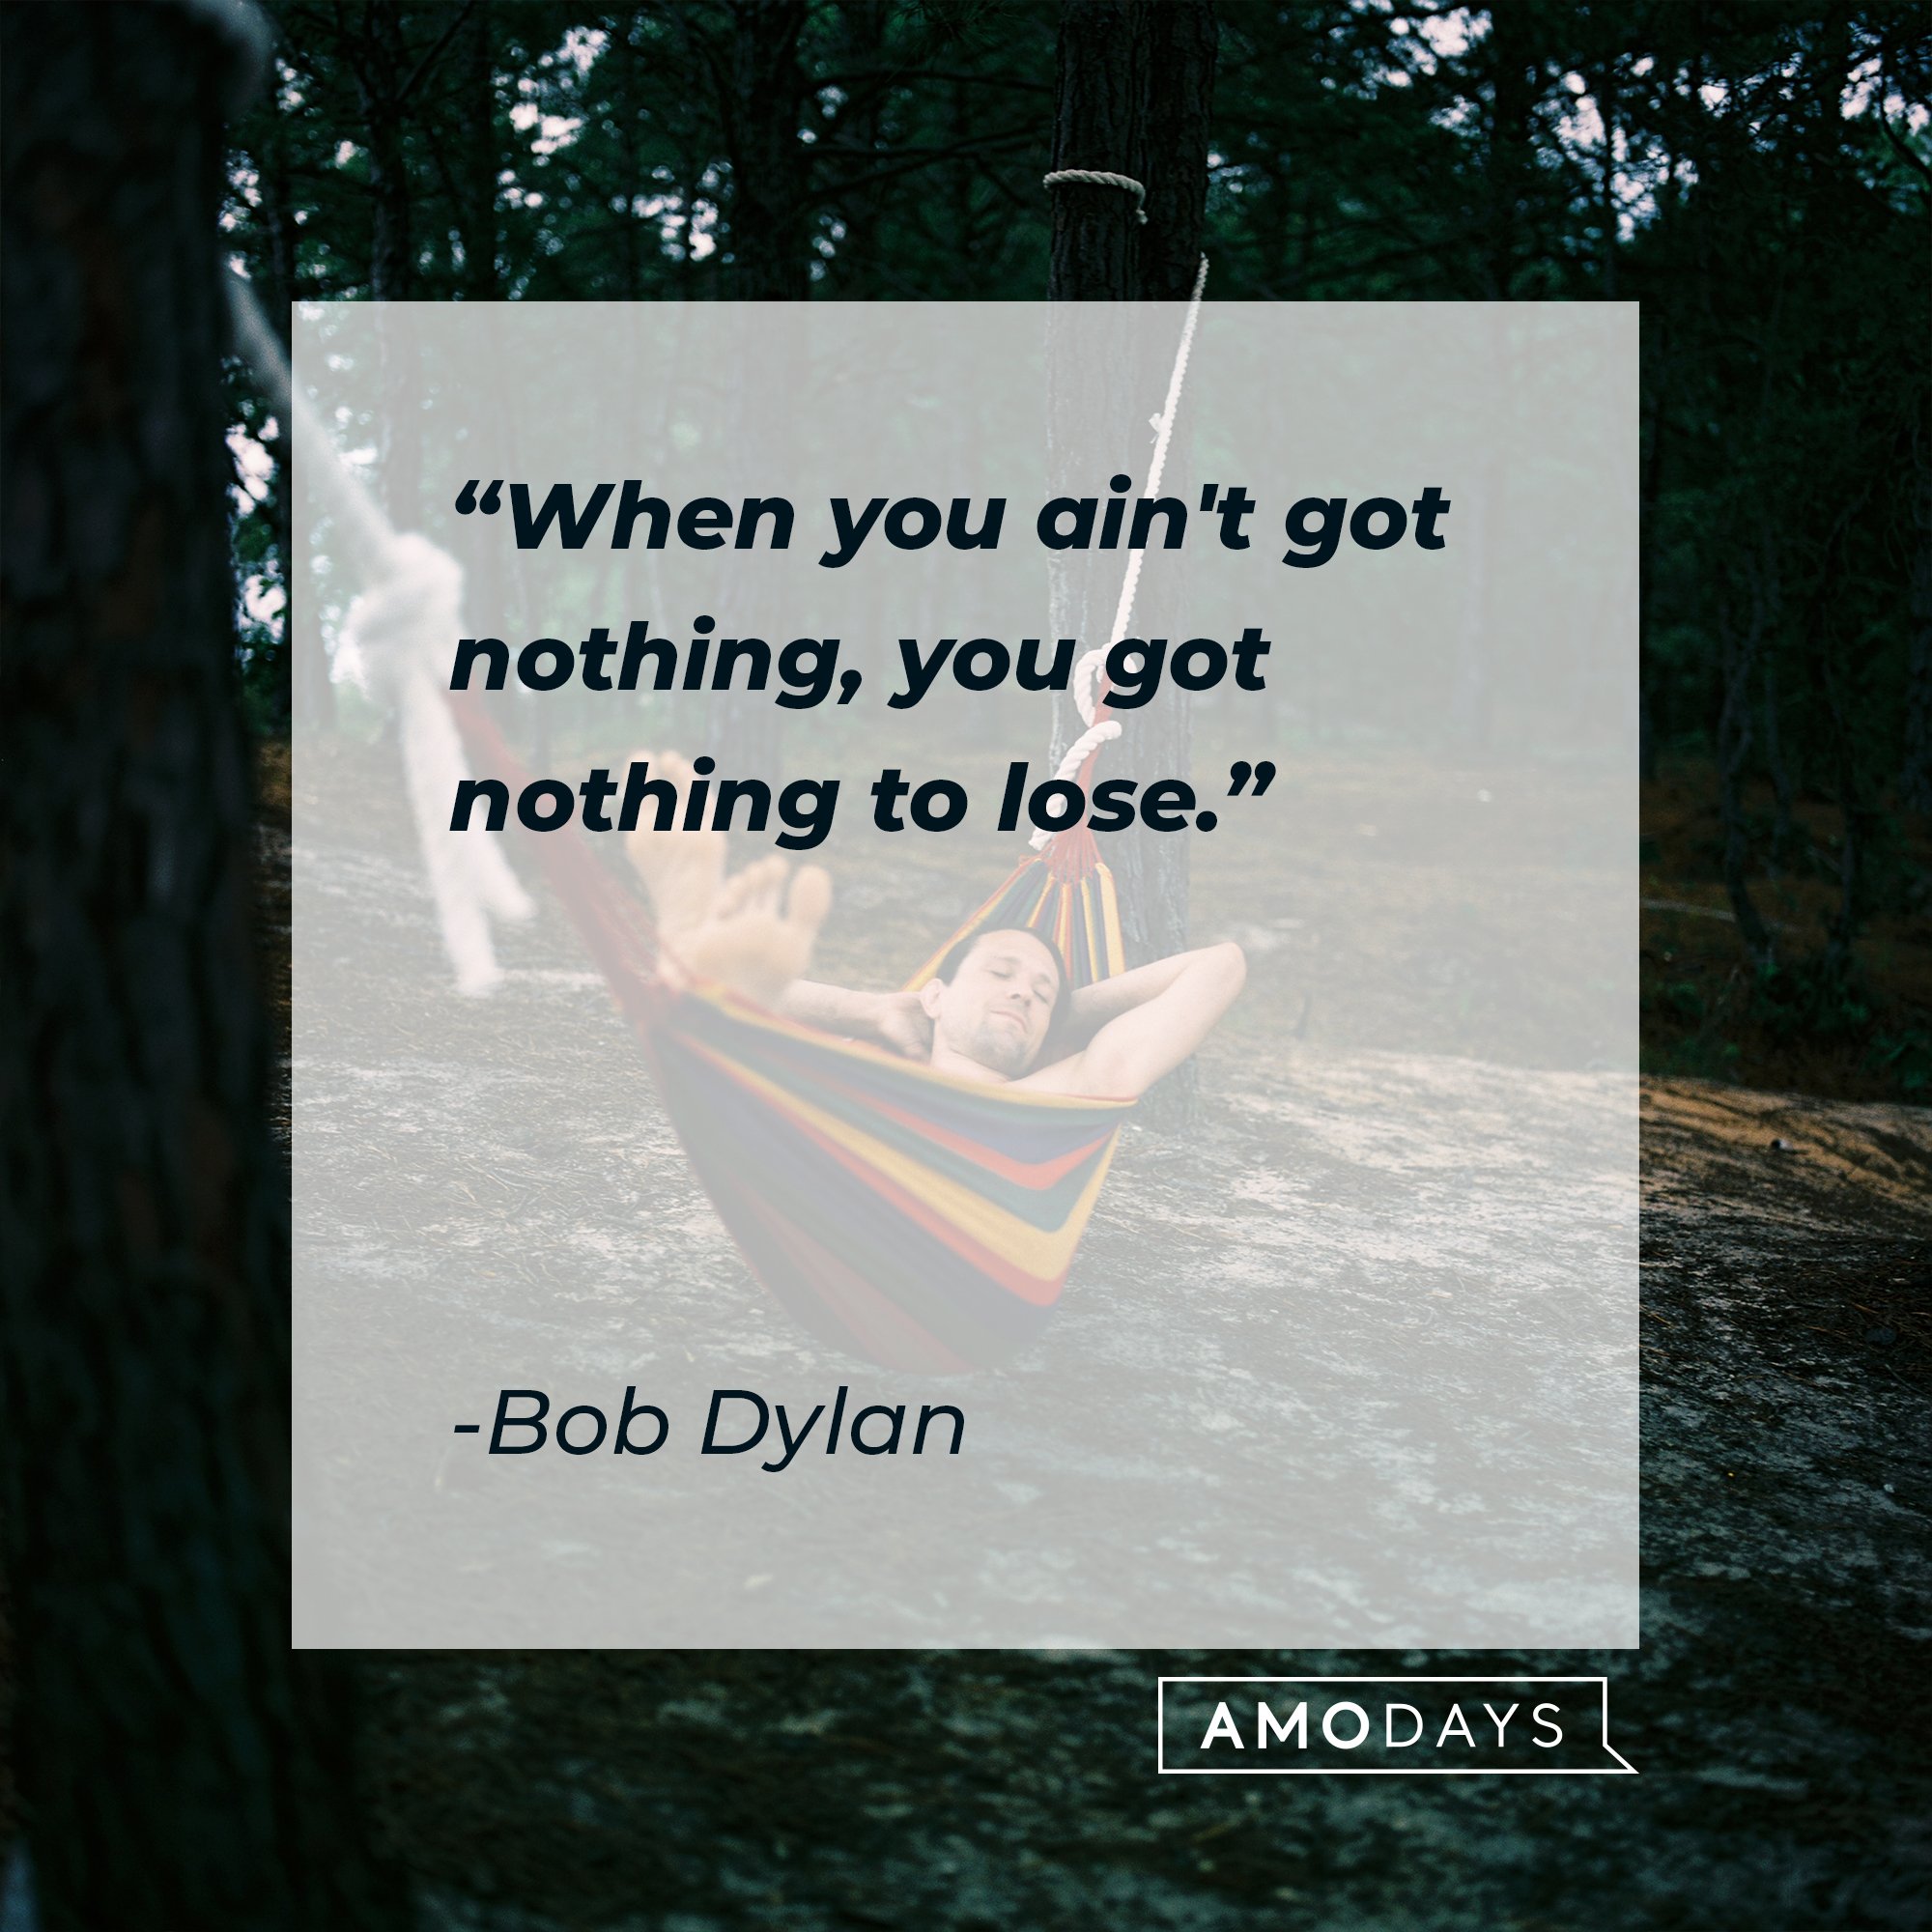  Bob Dylan's quote: "When you ain't got nothing, you got nothing to lose." | Image: AmoDays   